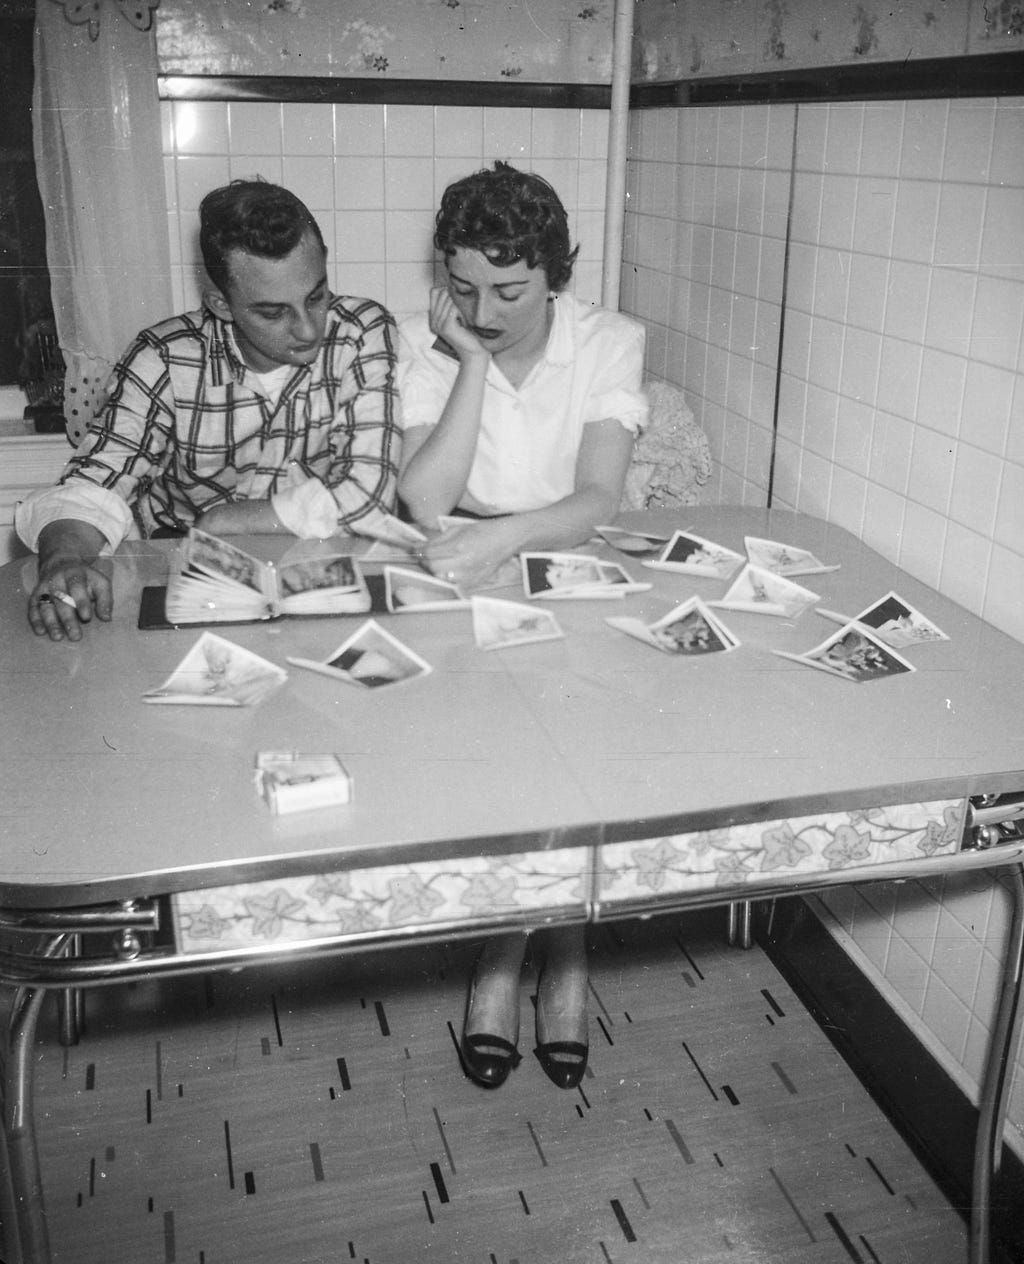 A man and woman sat at an old dining table looking at photographs